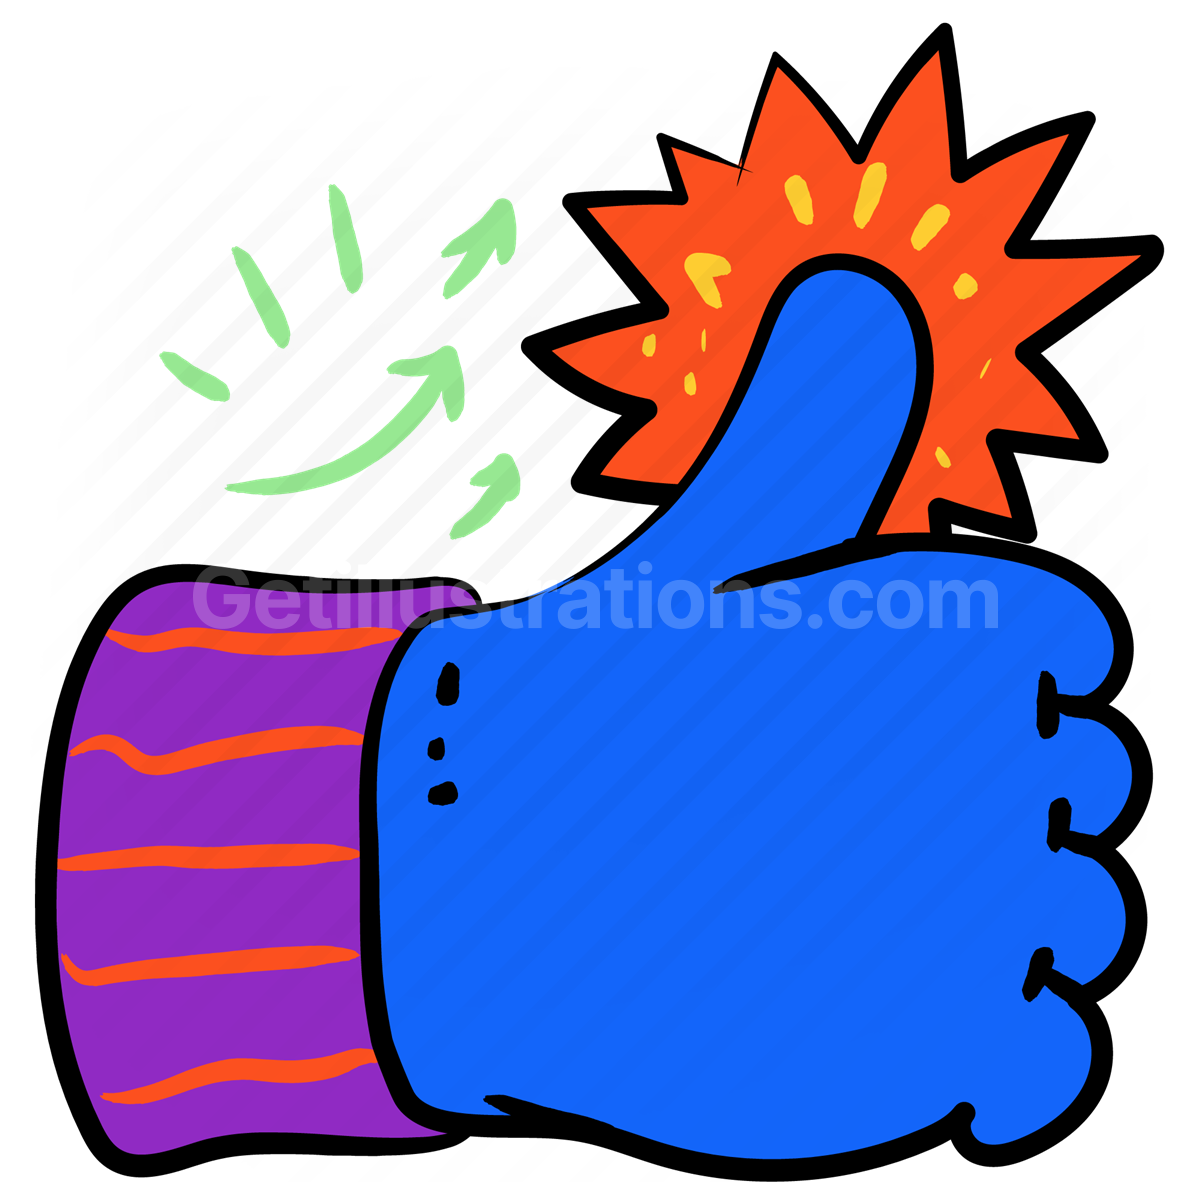 hand, gesture, hand gesture, sticker, thumbs up, approve, approval